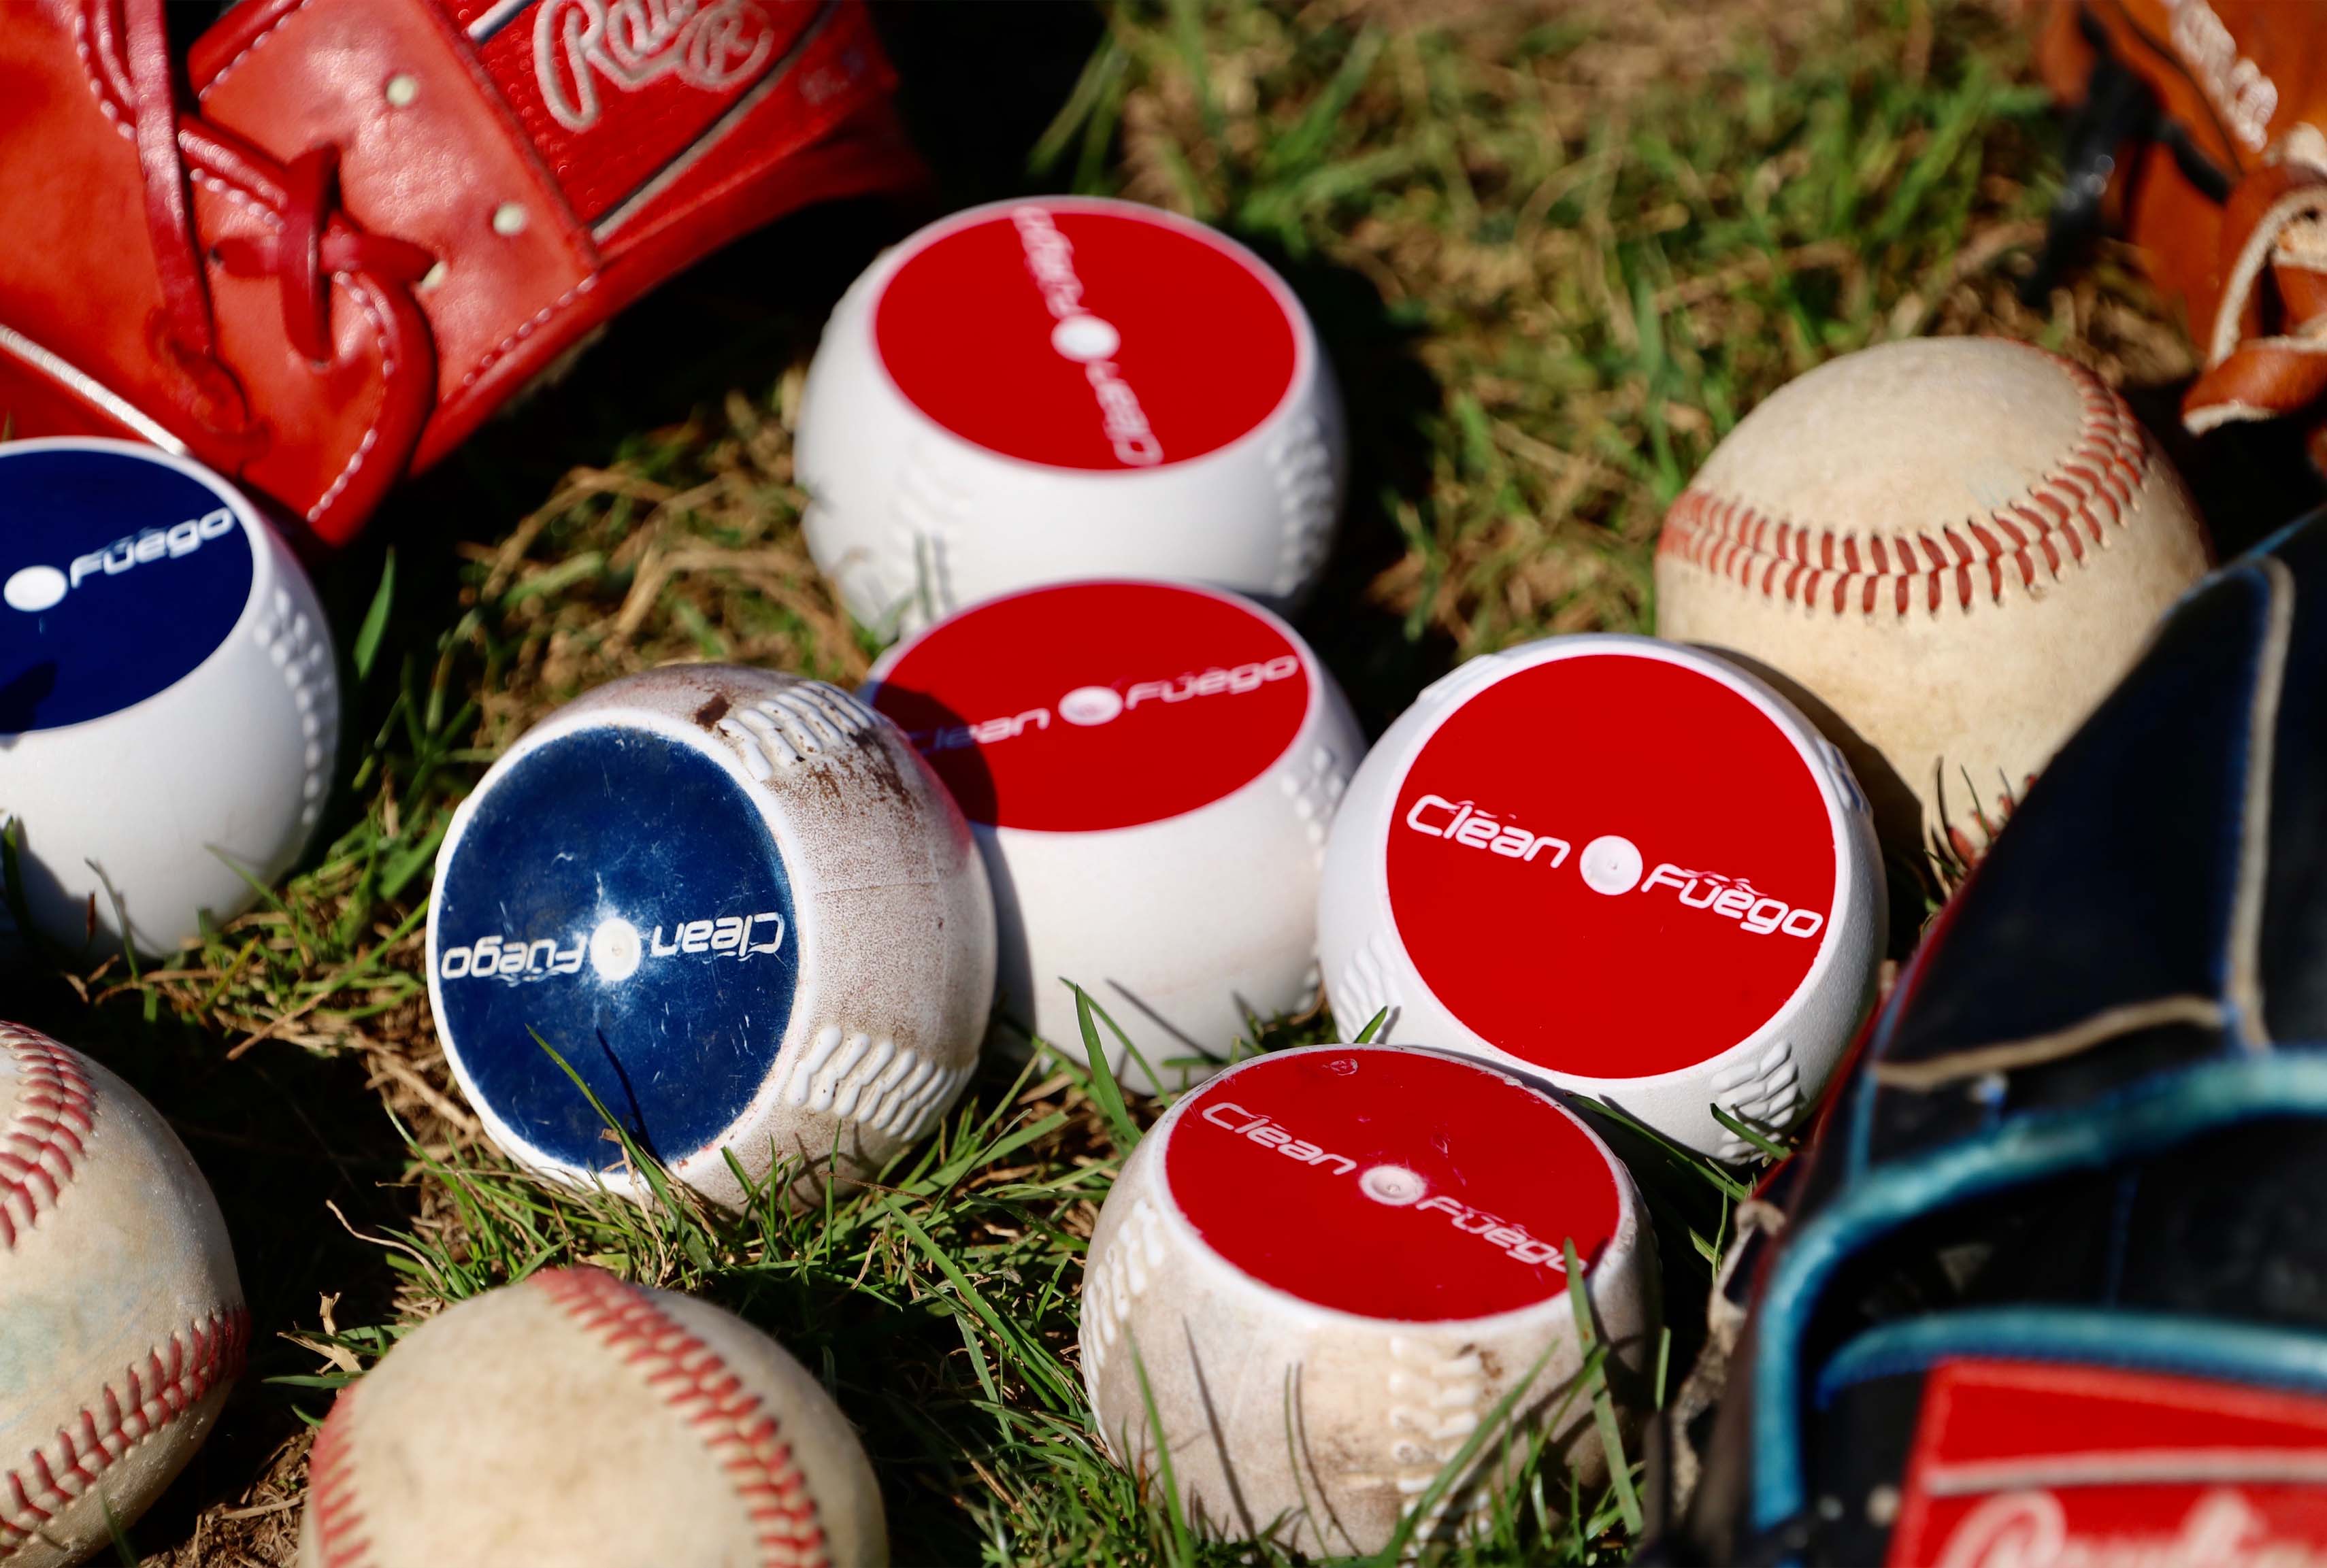 Group of CleanFuego baseballs sitting in grass next to a few baseball gloves